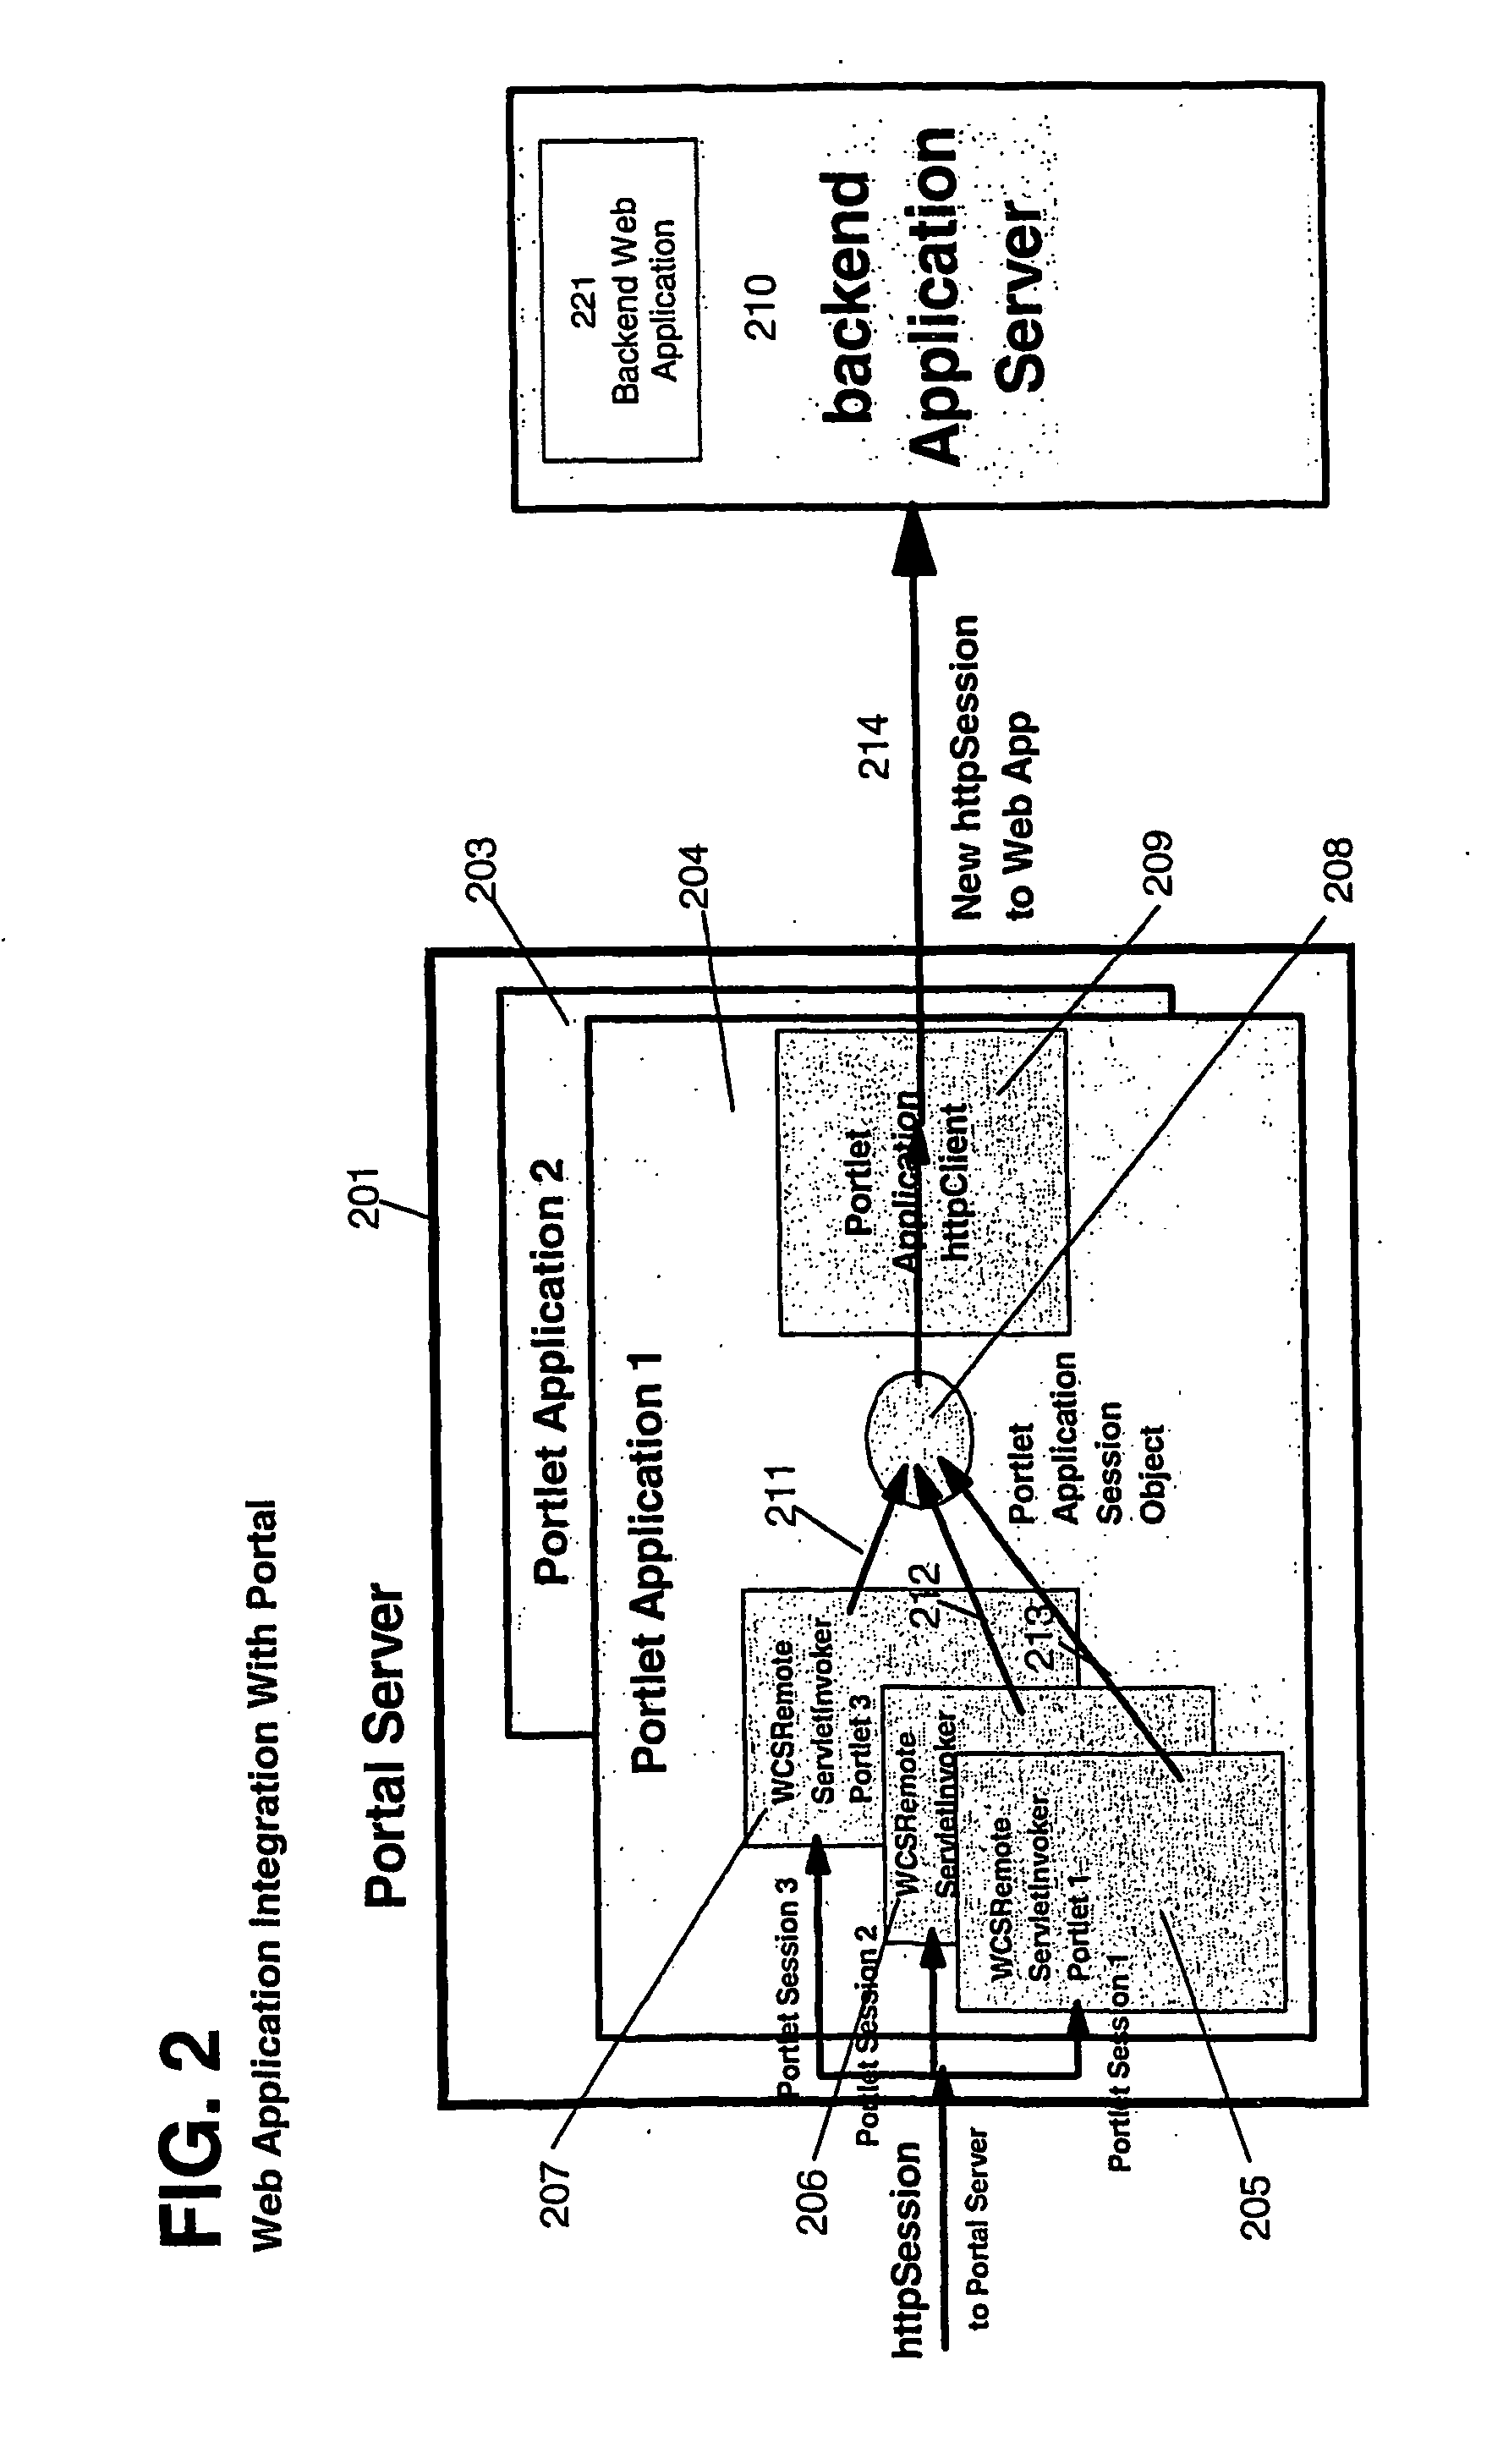 Method and apparatus for using business rules or user roles for selecting portlets in a web portal